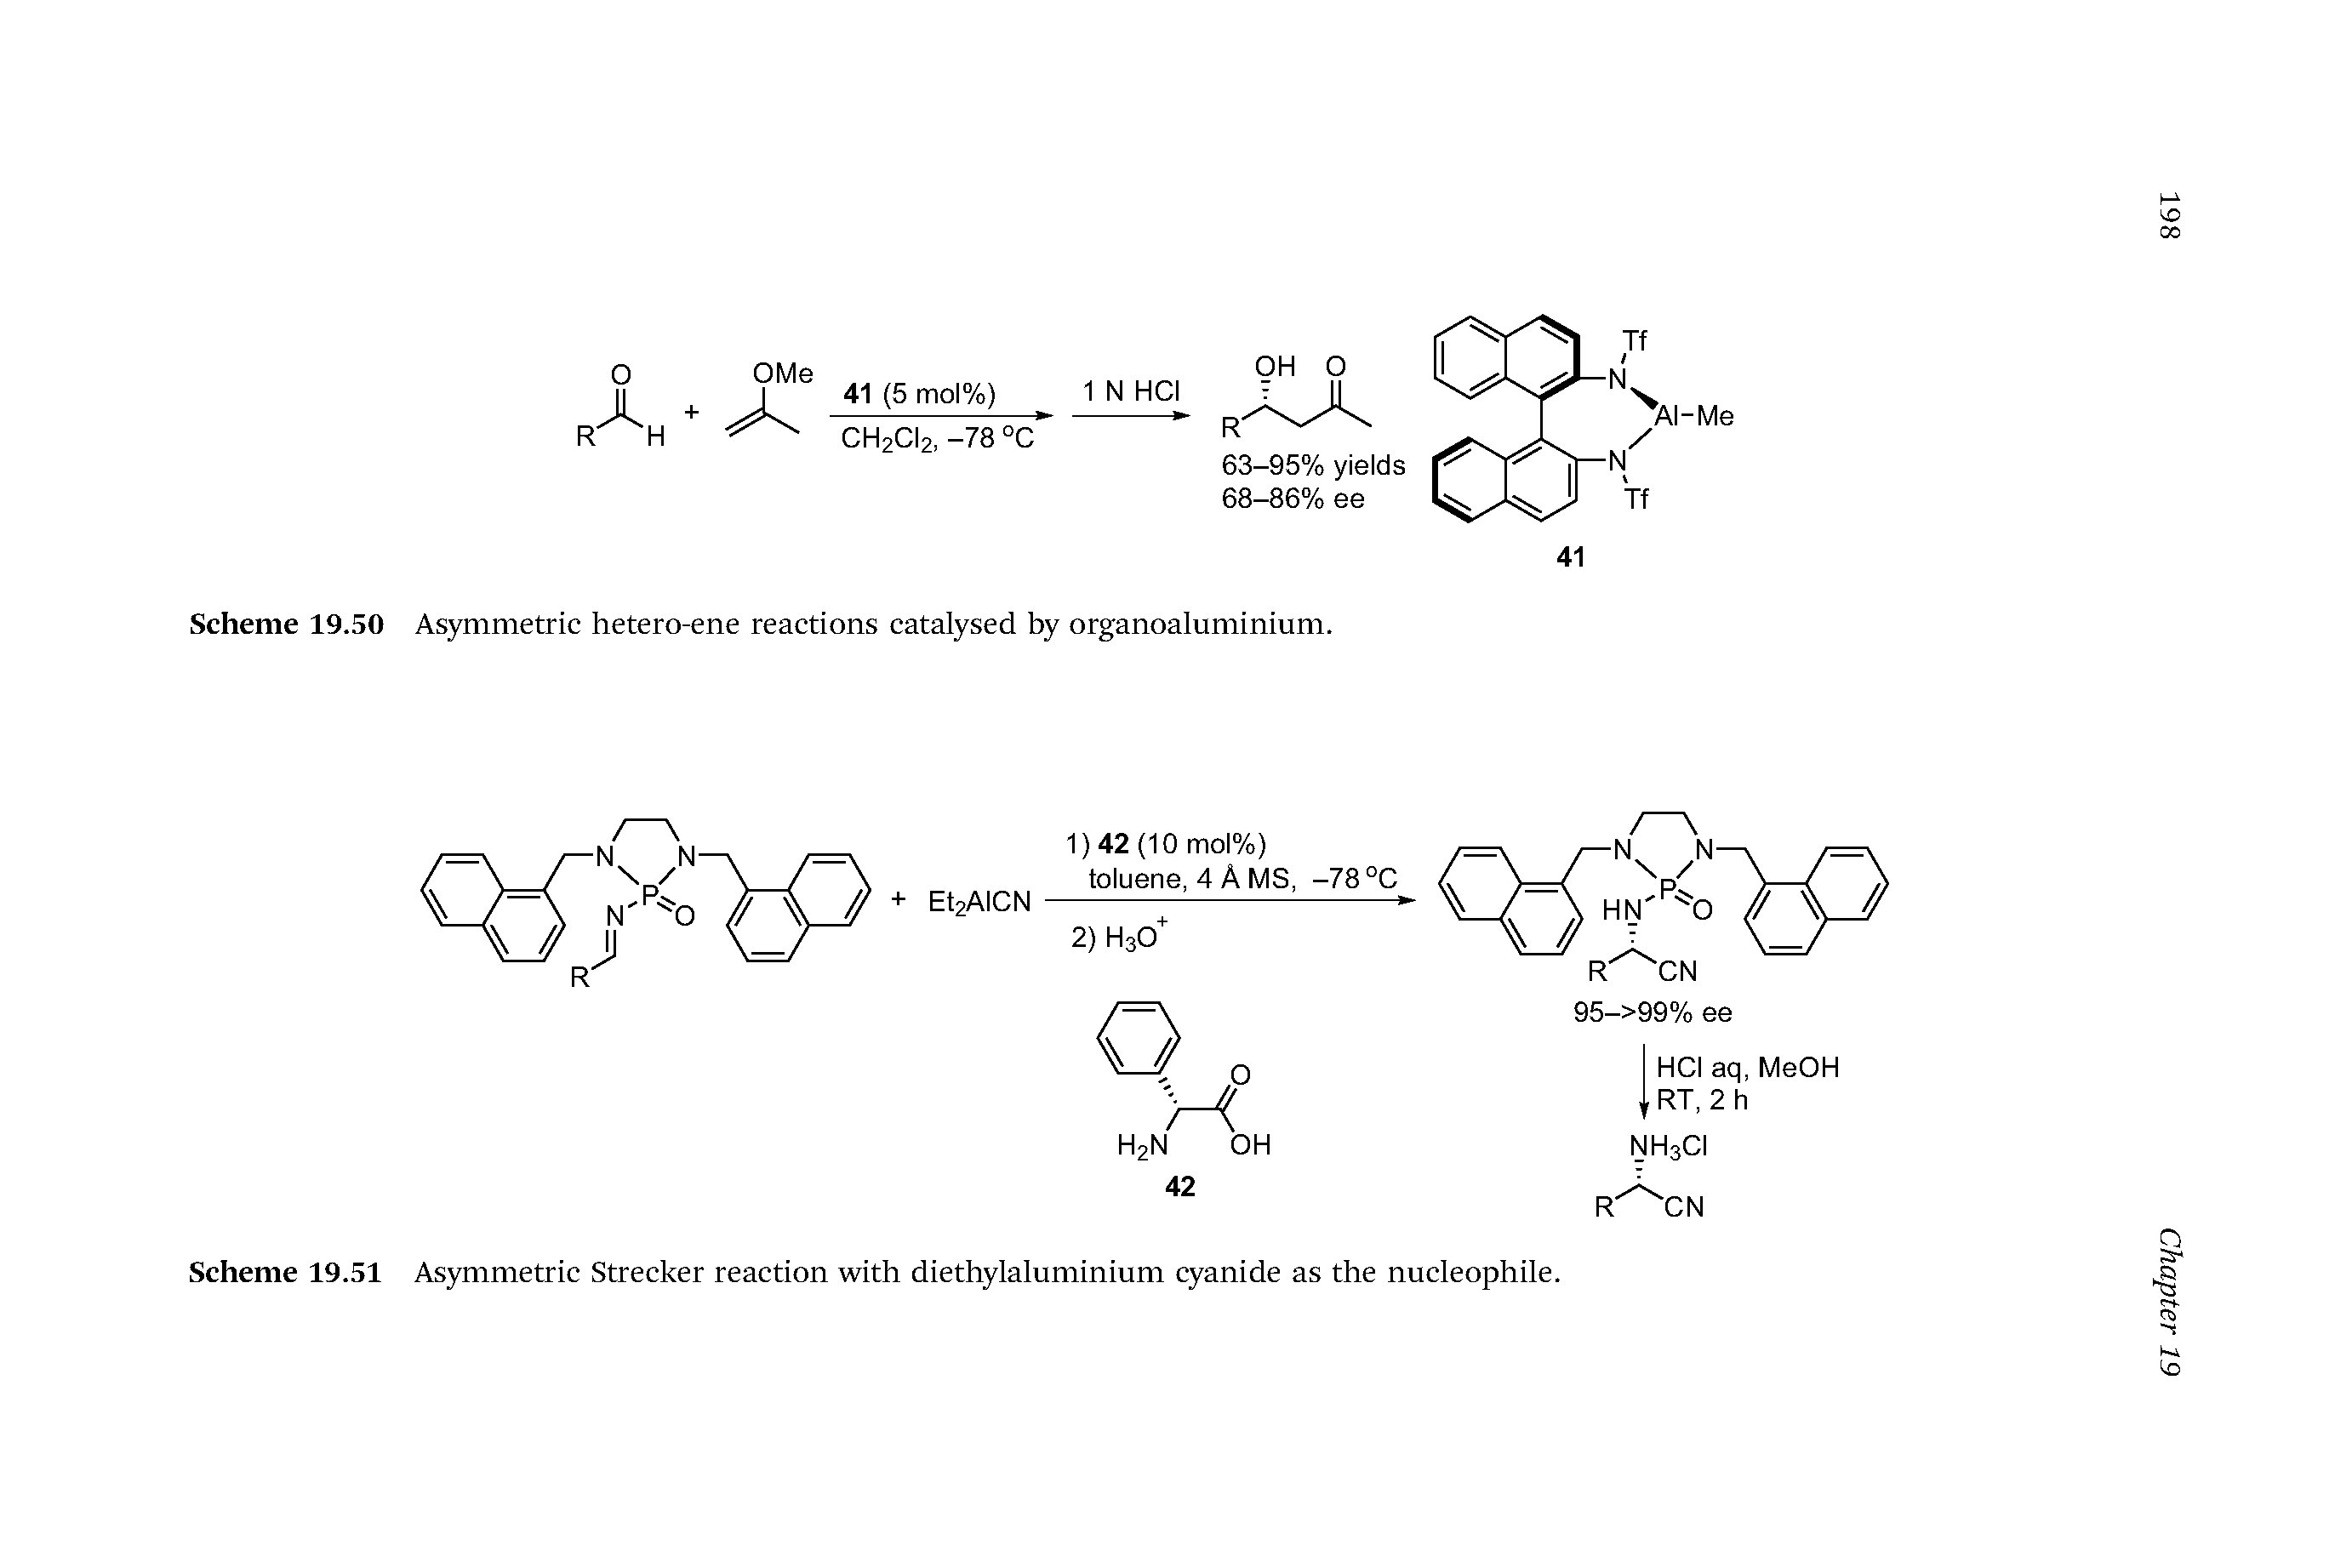 Scheme 19.51 Asymmetric Strecker reaction with diethylaluminium cyanide as the nucleophile.